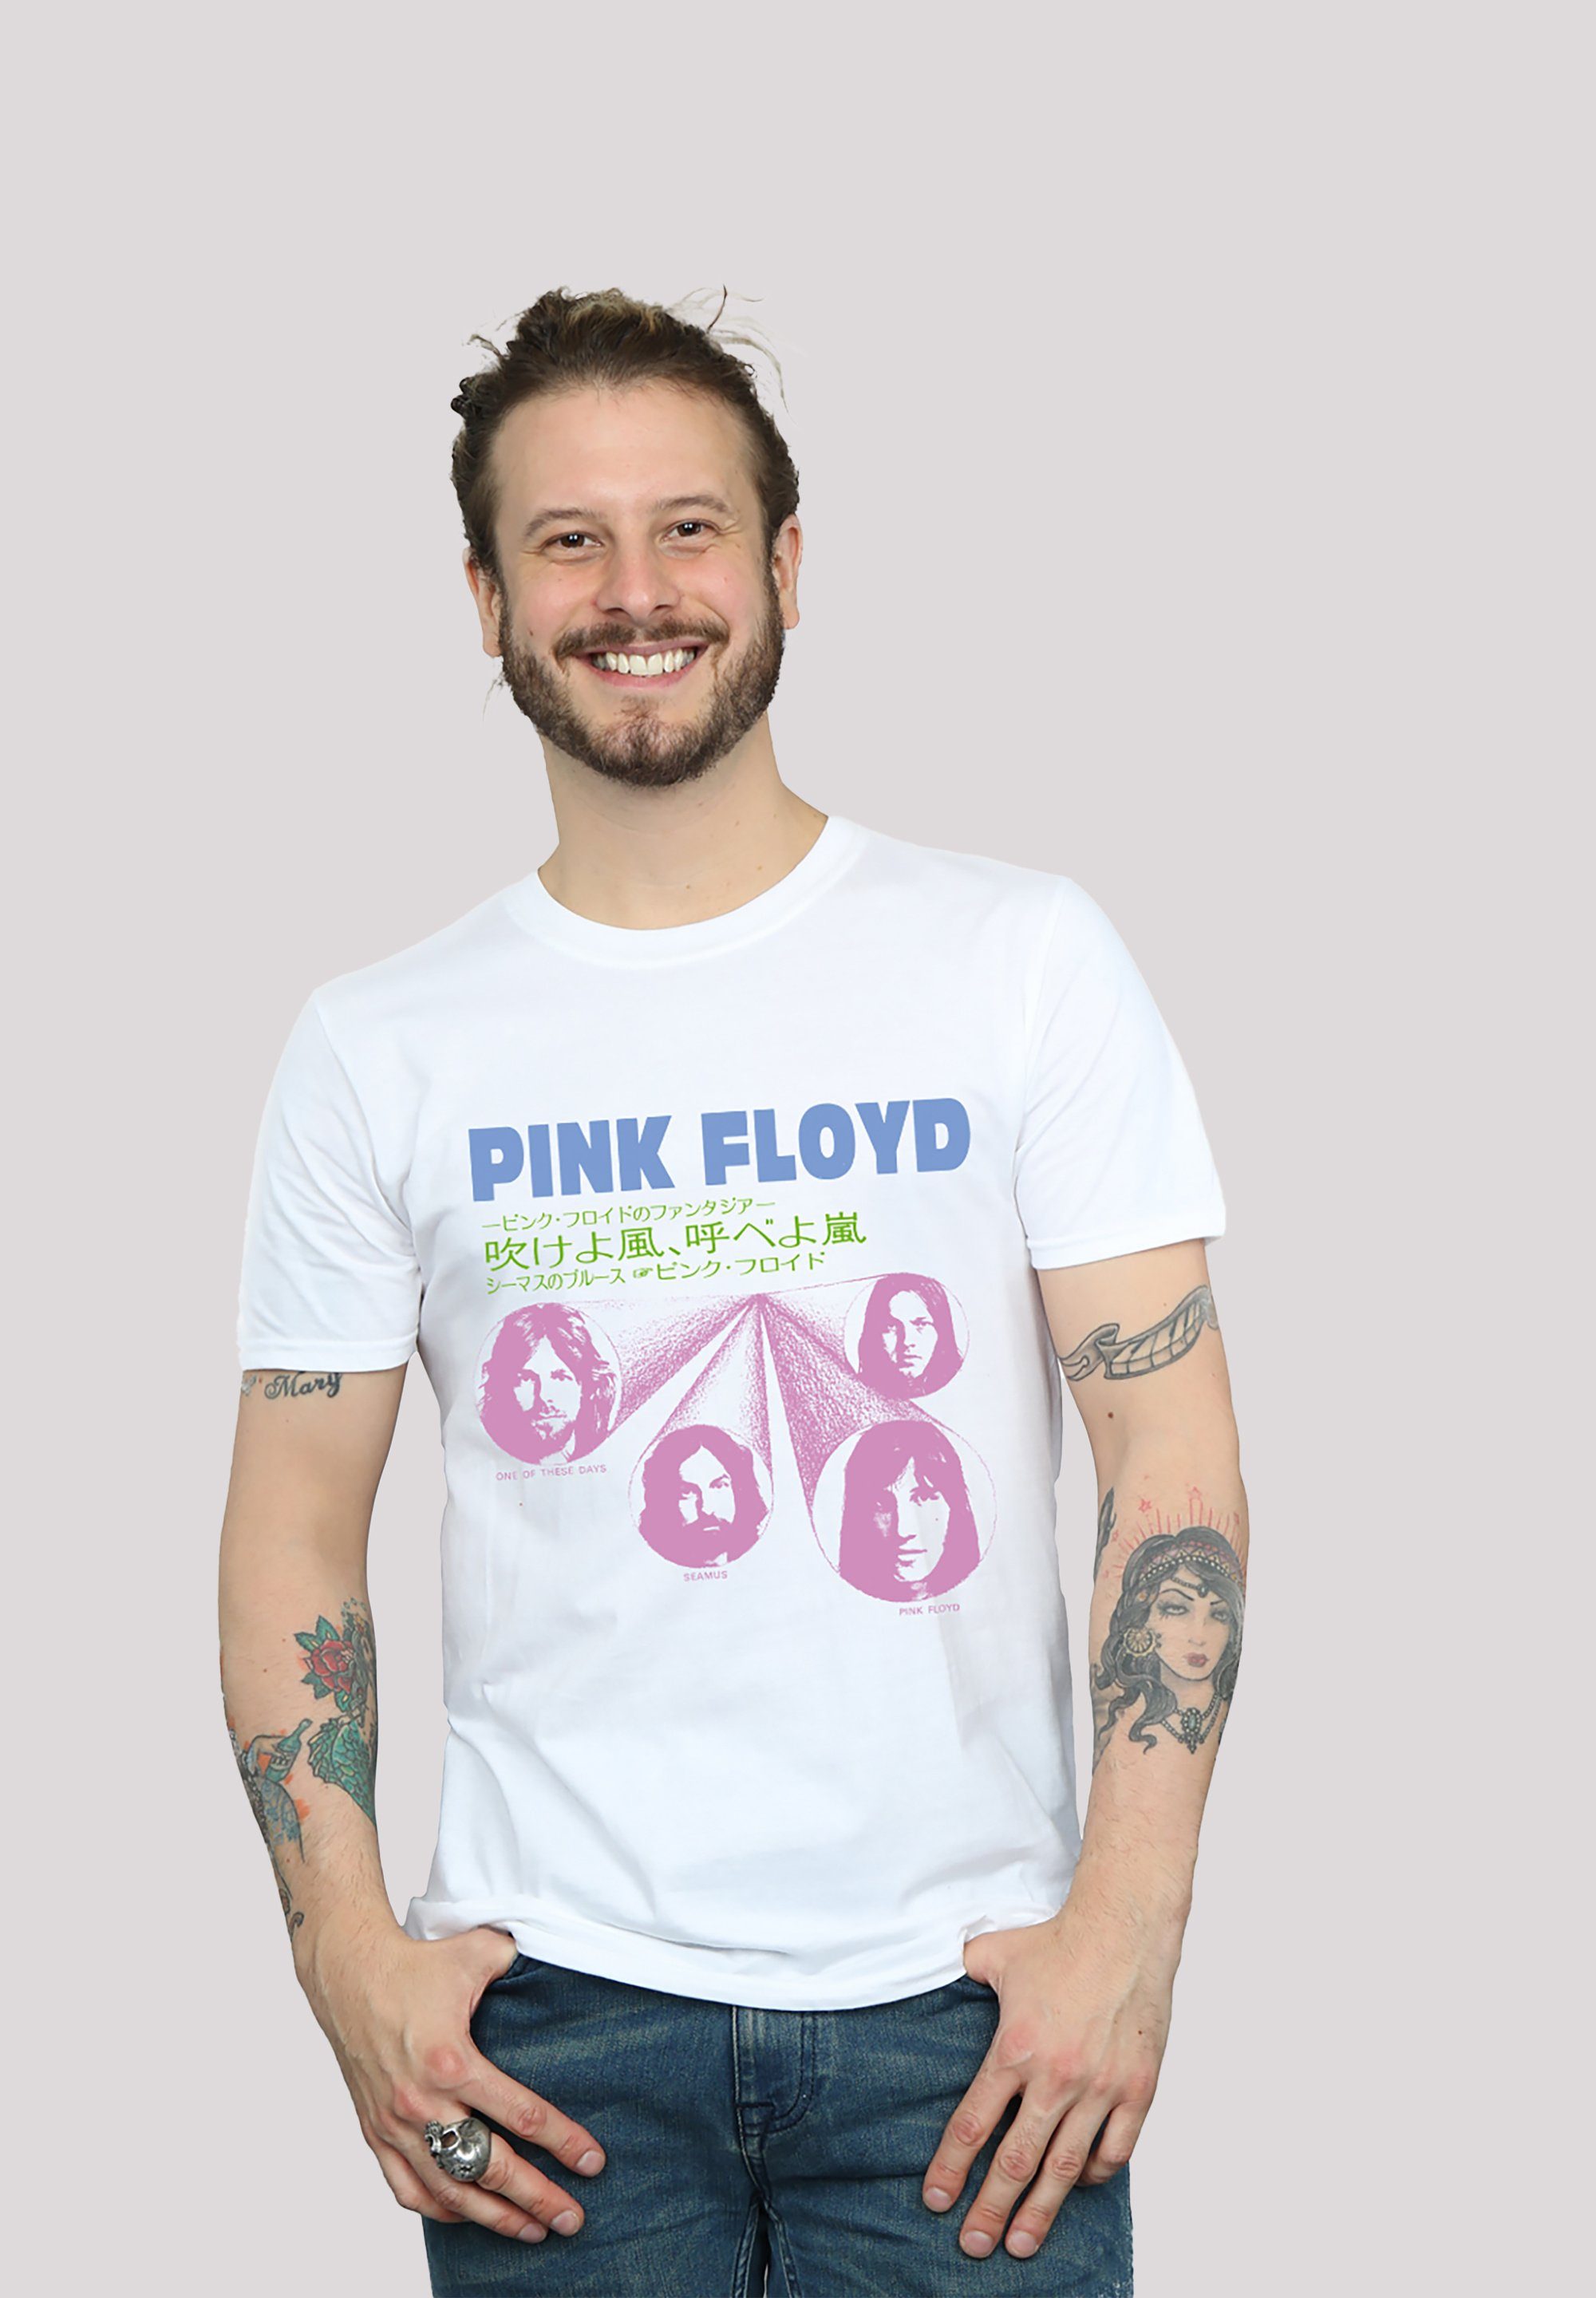 F4NT4STIC These Print Days One Pink T-Shirt Of Floyd